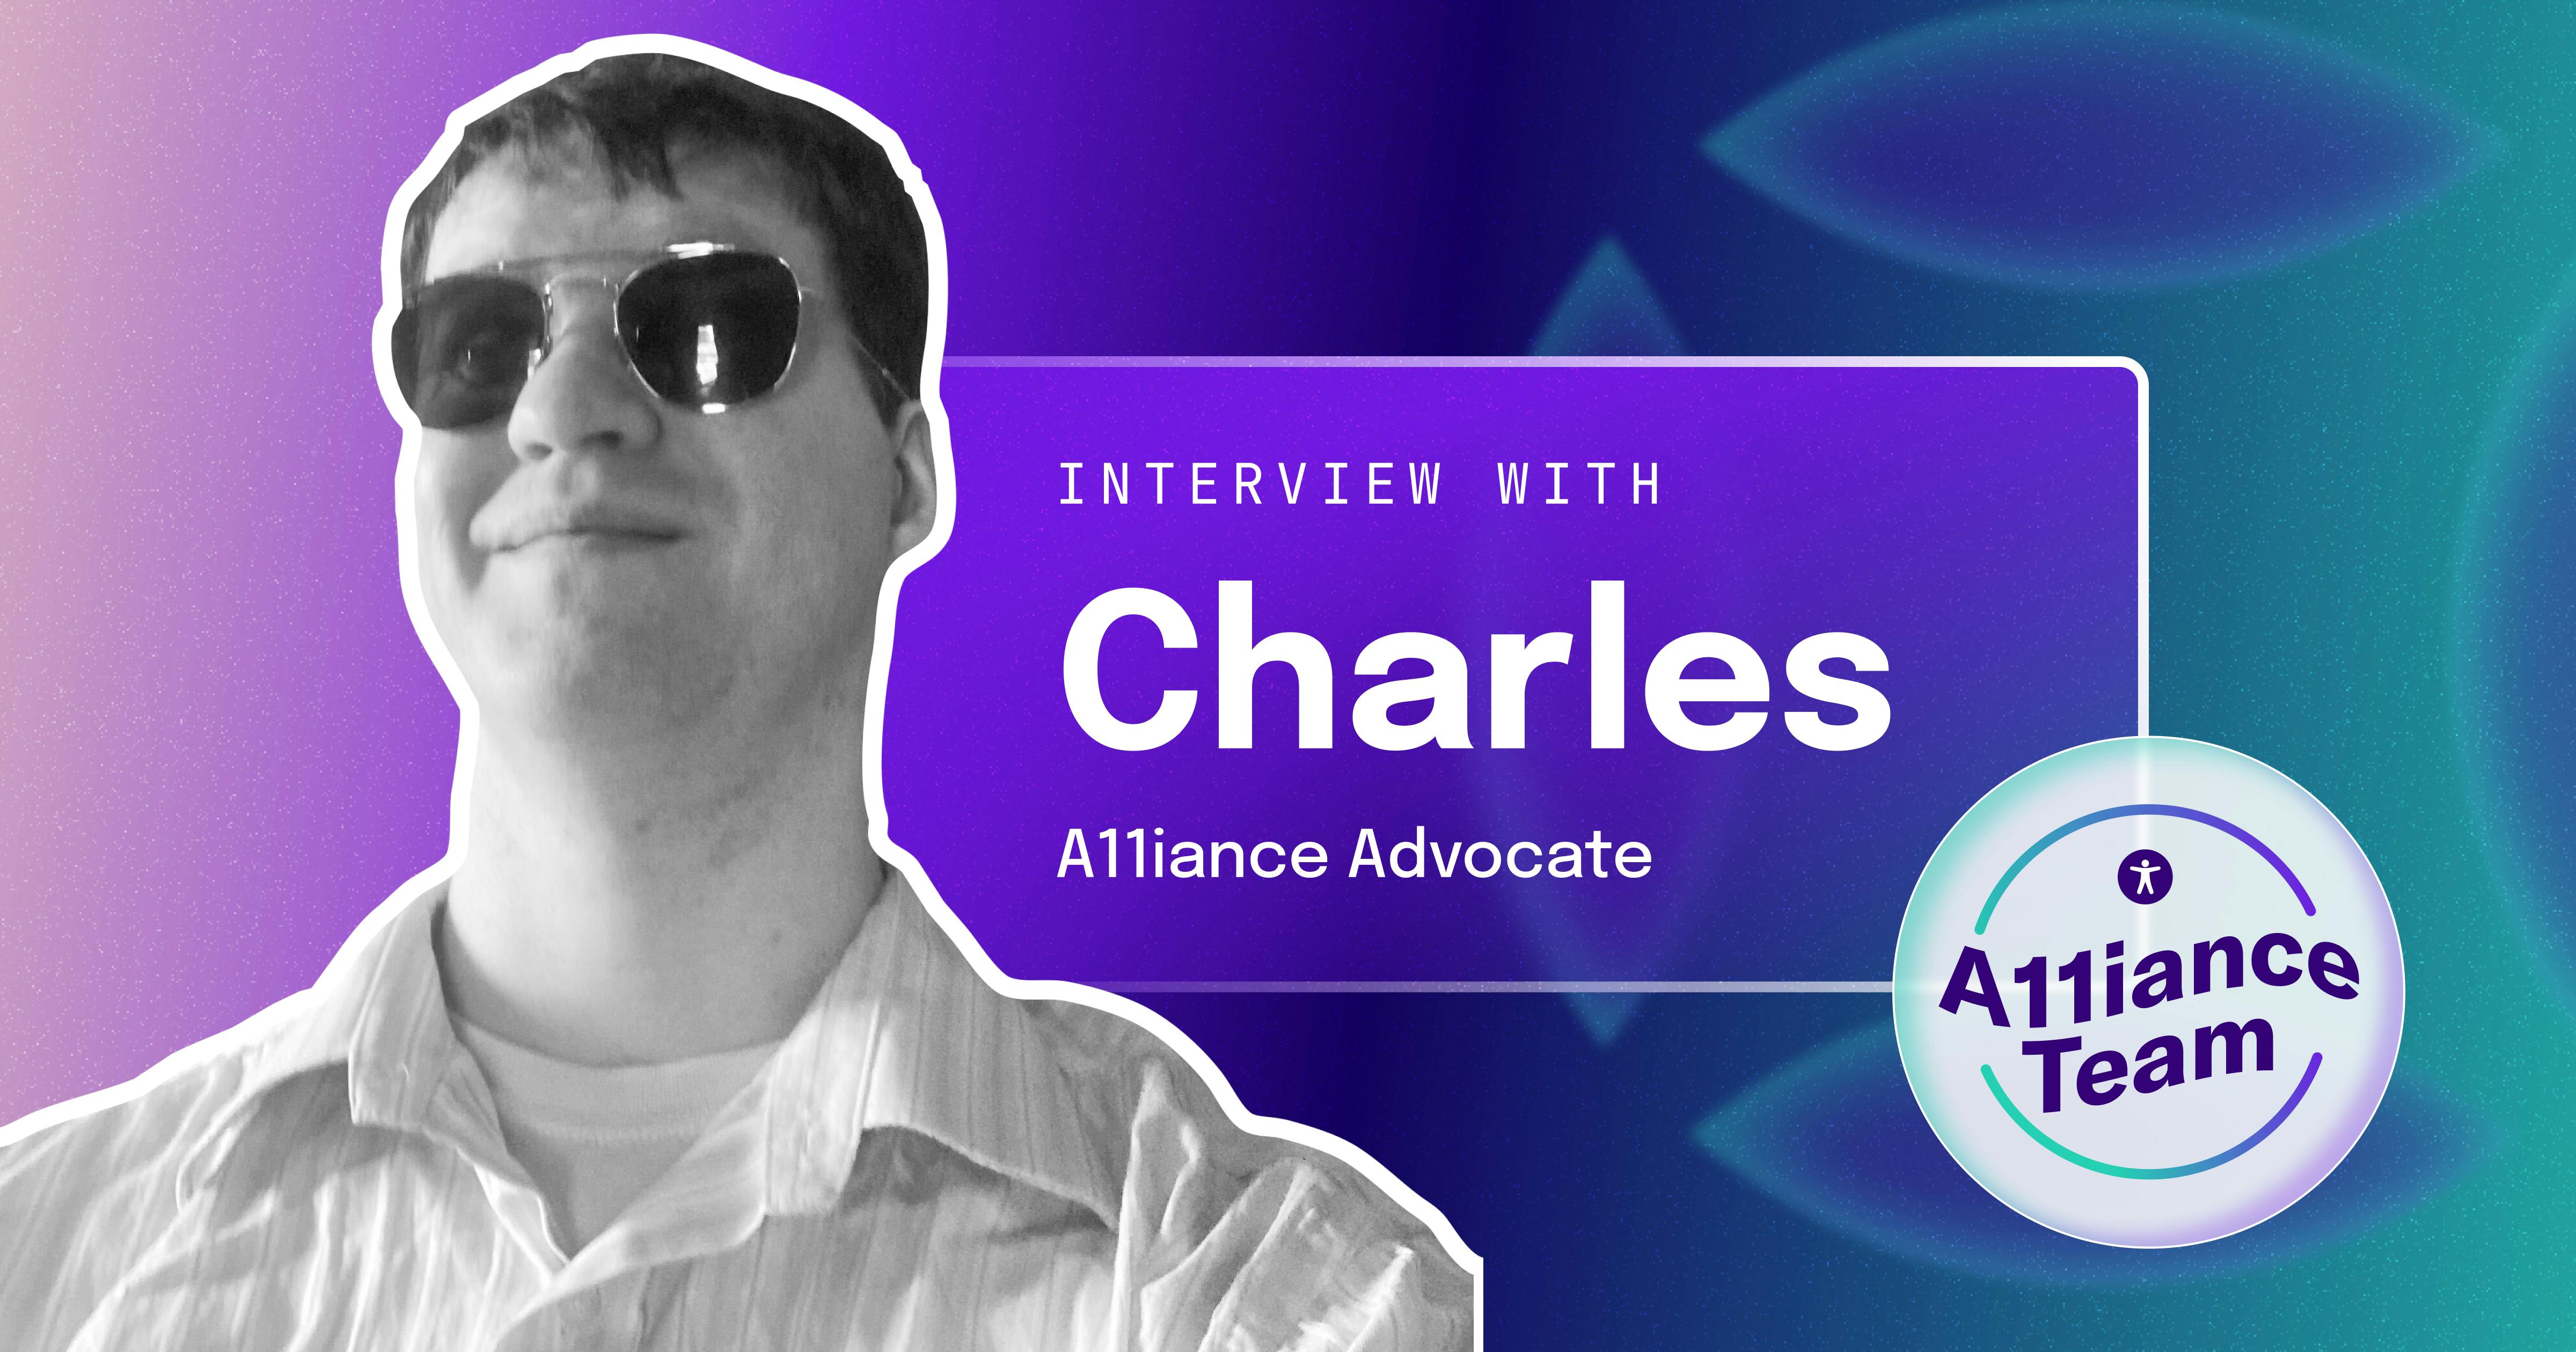 Charles, a man wearing sunglasses, is smiling and looking up and to the right. Next to him is a label that reads "Interview with Charles, Alliance Advocate"